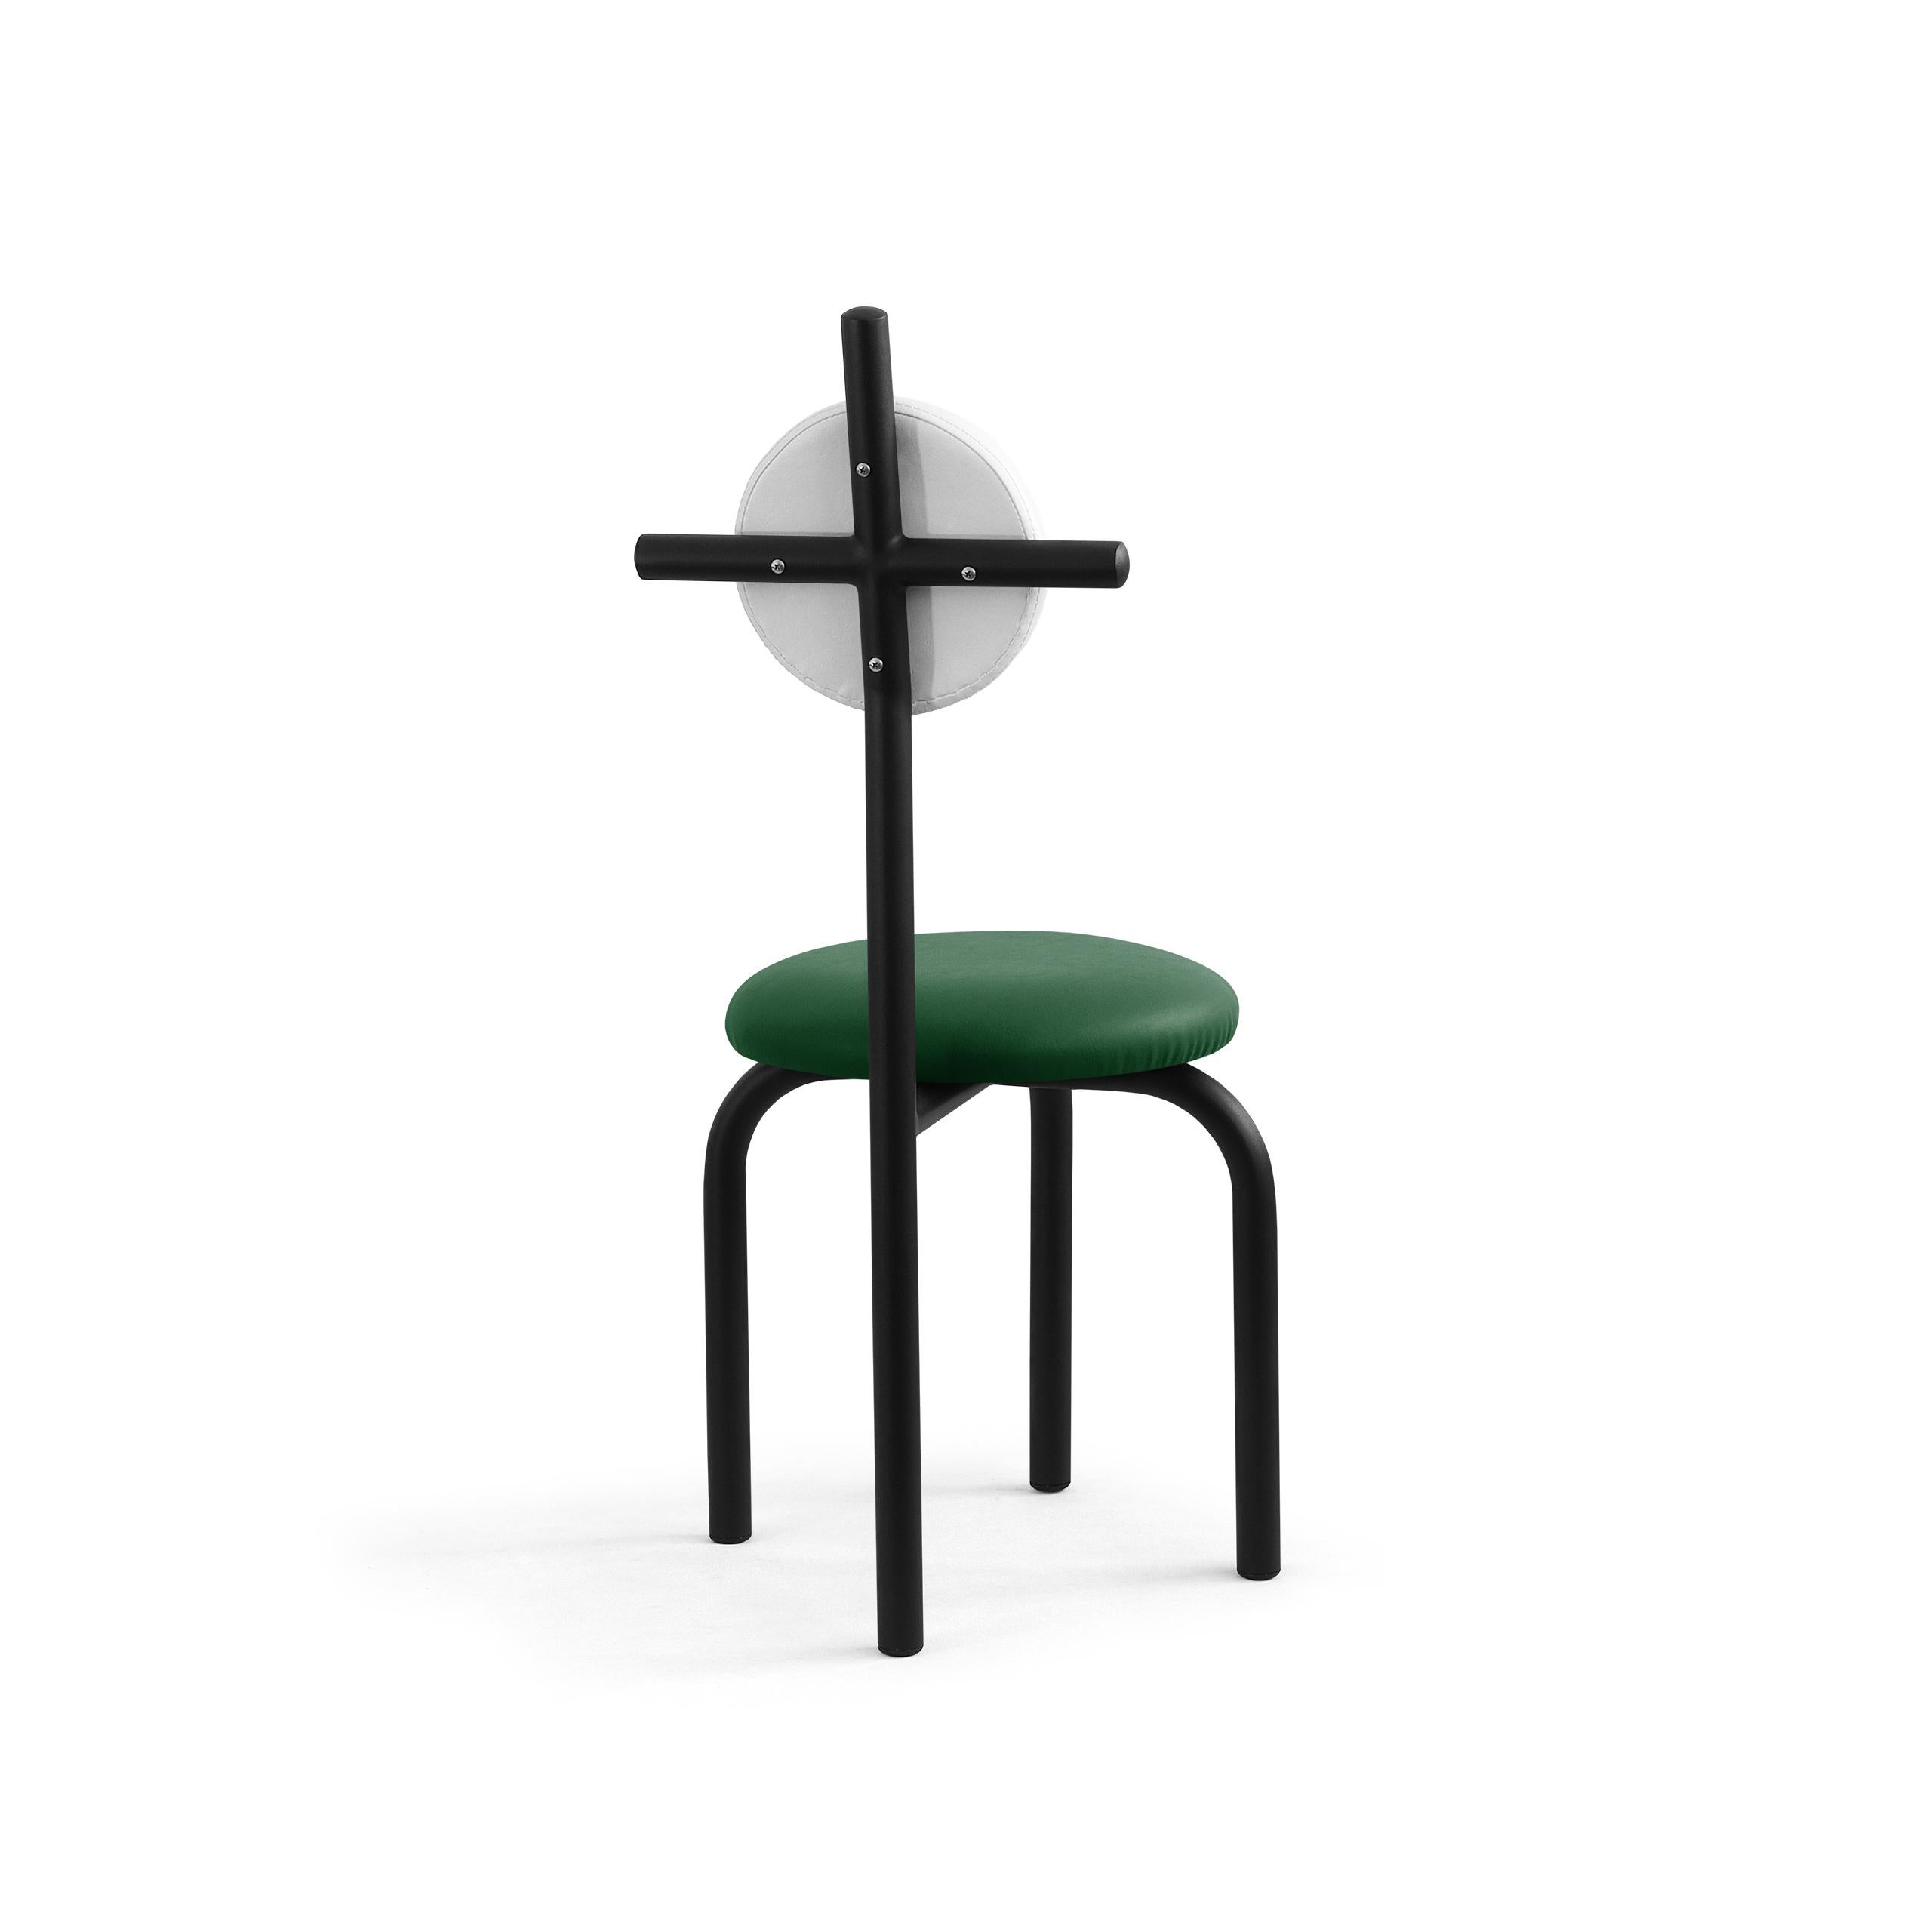 PK16 Impermeable Chair, Green Seat & Carbon Steel Structure by Paulo Kobylka In New Condition For Sale In Londrina, Paraná